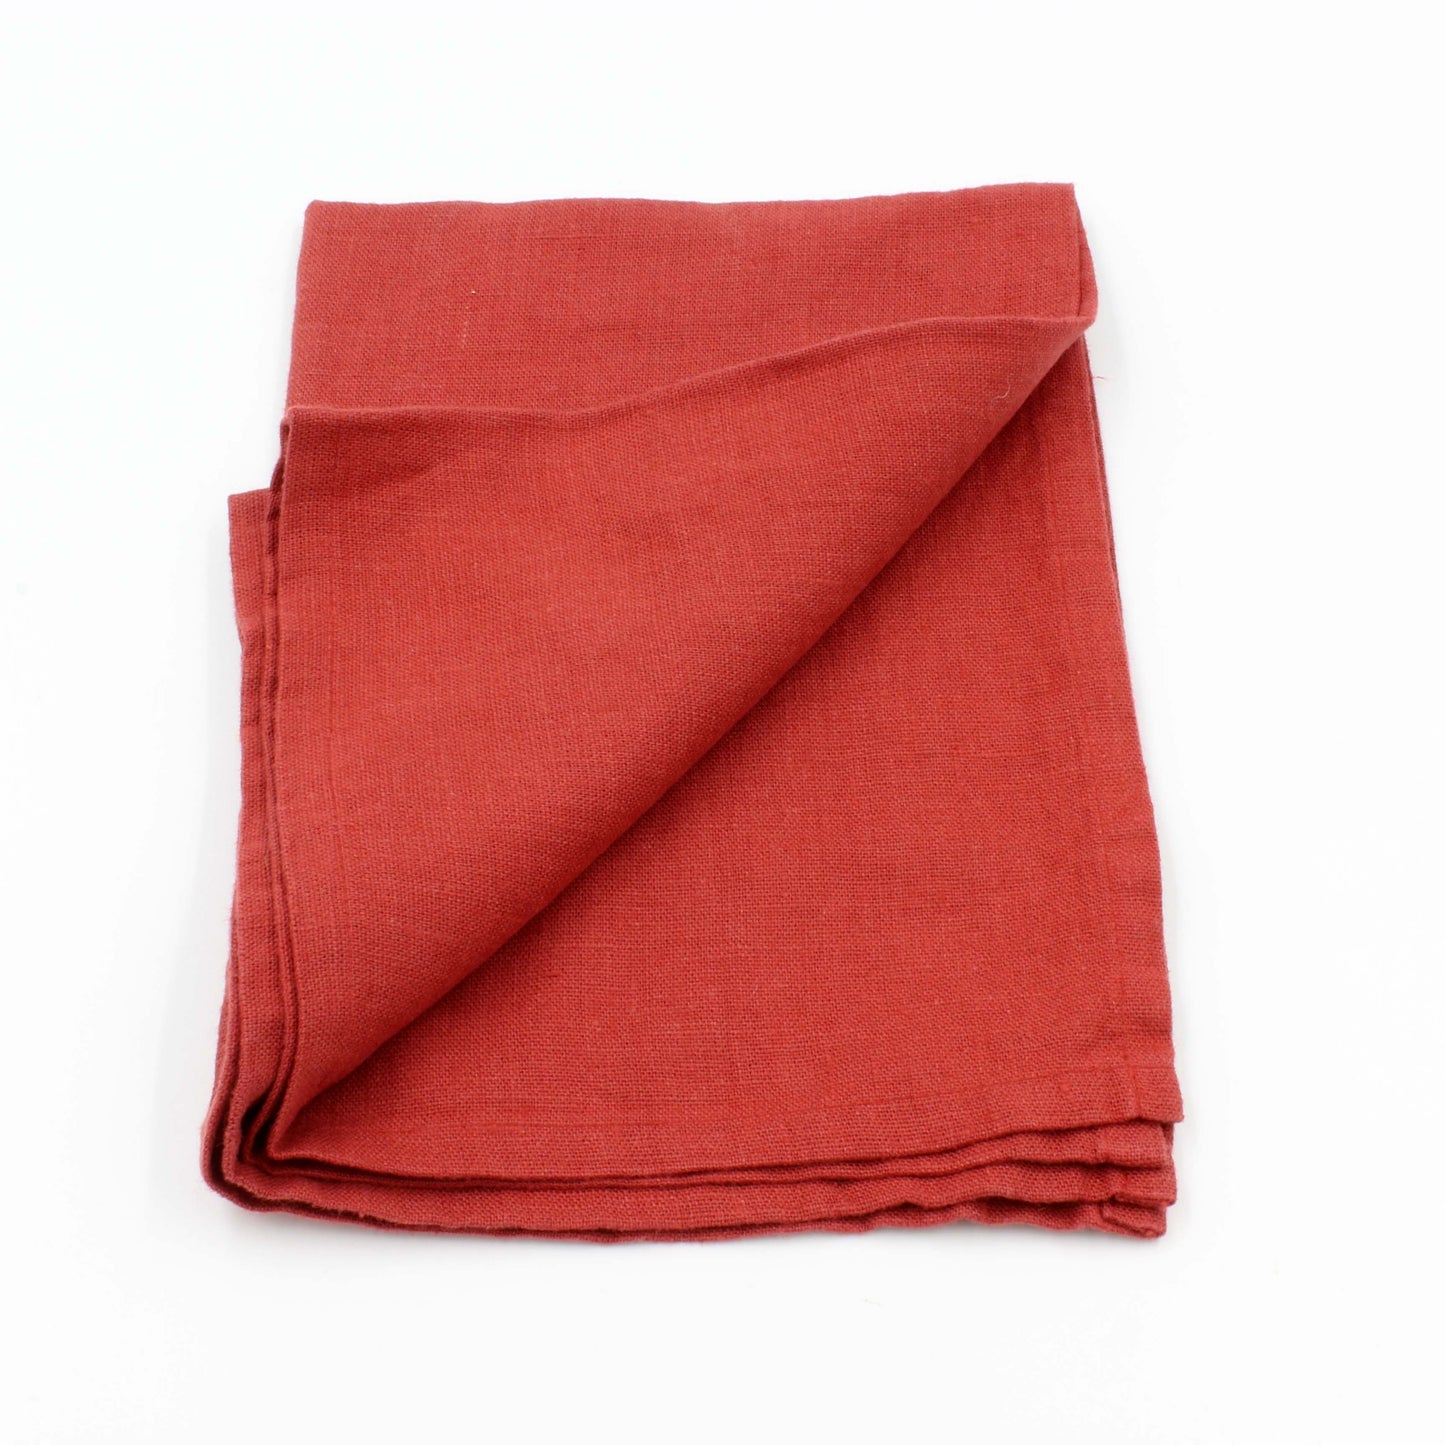 Linen Kitchen Towel - Red Pear